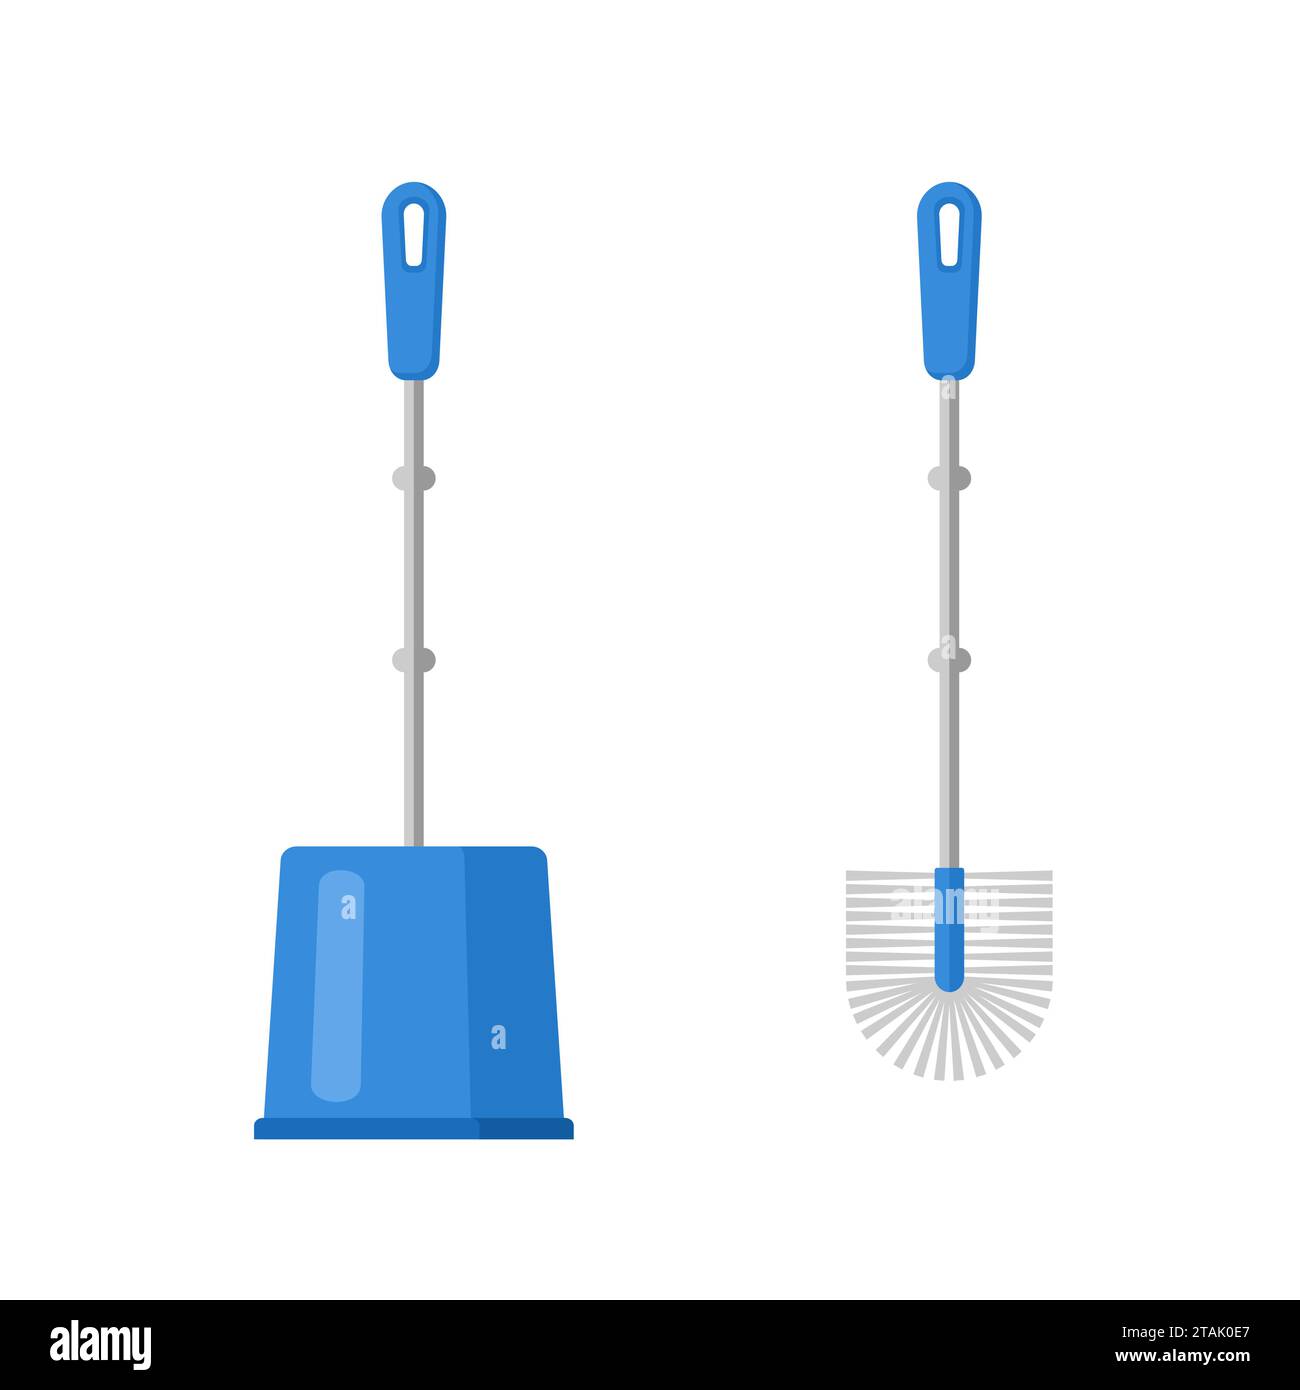 Blue toilet brush isolated on white background. A tool for cleaning the toilet and other plumbing equipment. Vector illustration. Stock Vector